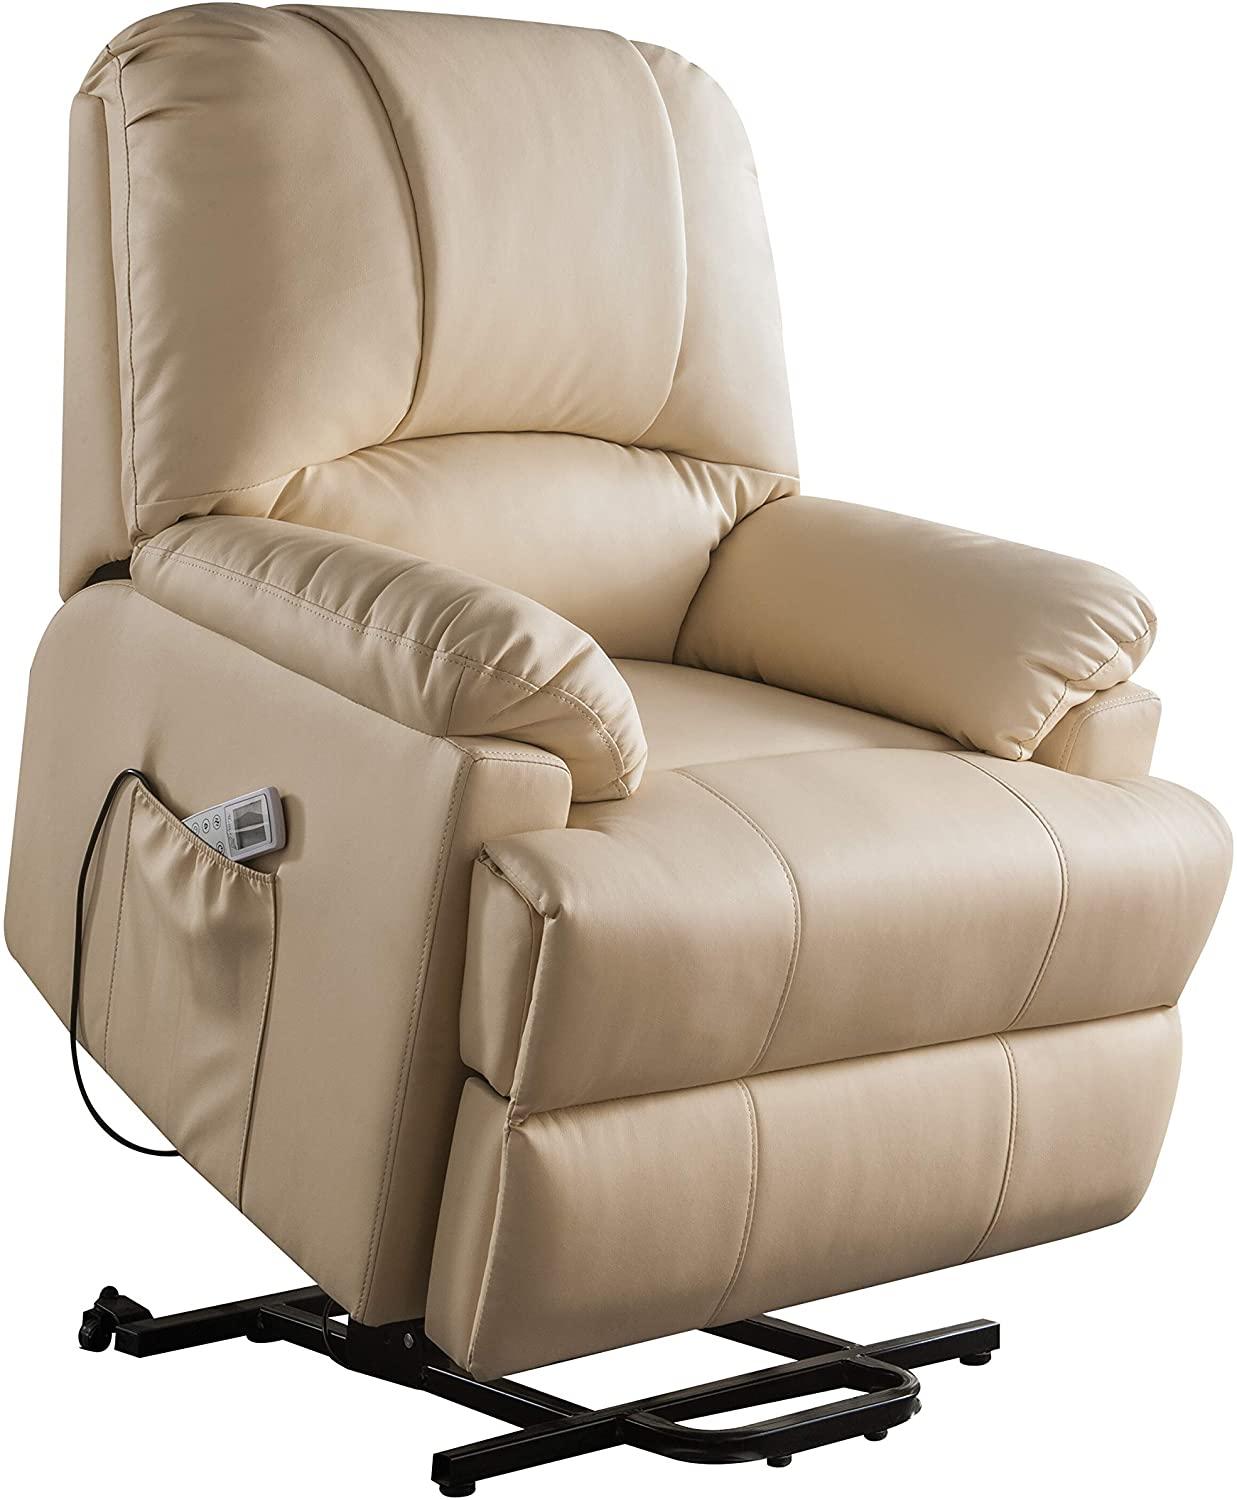 

    
Contemporary Beige Faux Leather PU Recliner  by Acme Ixora 59286
